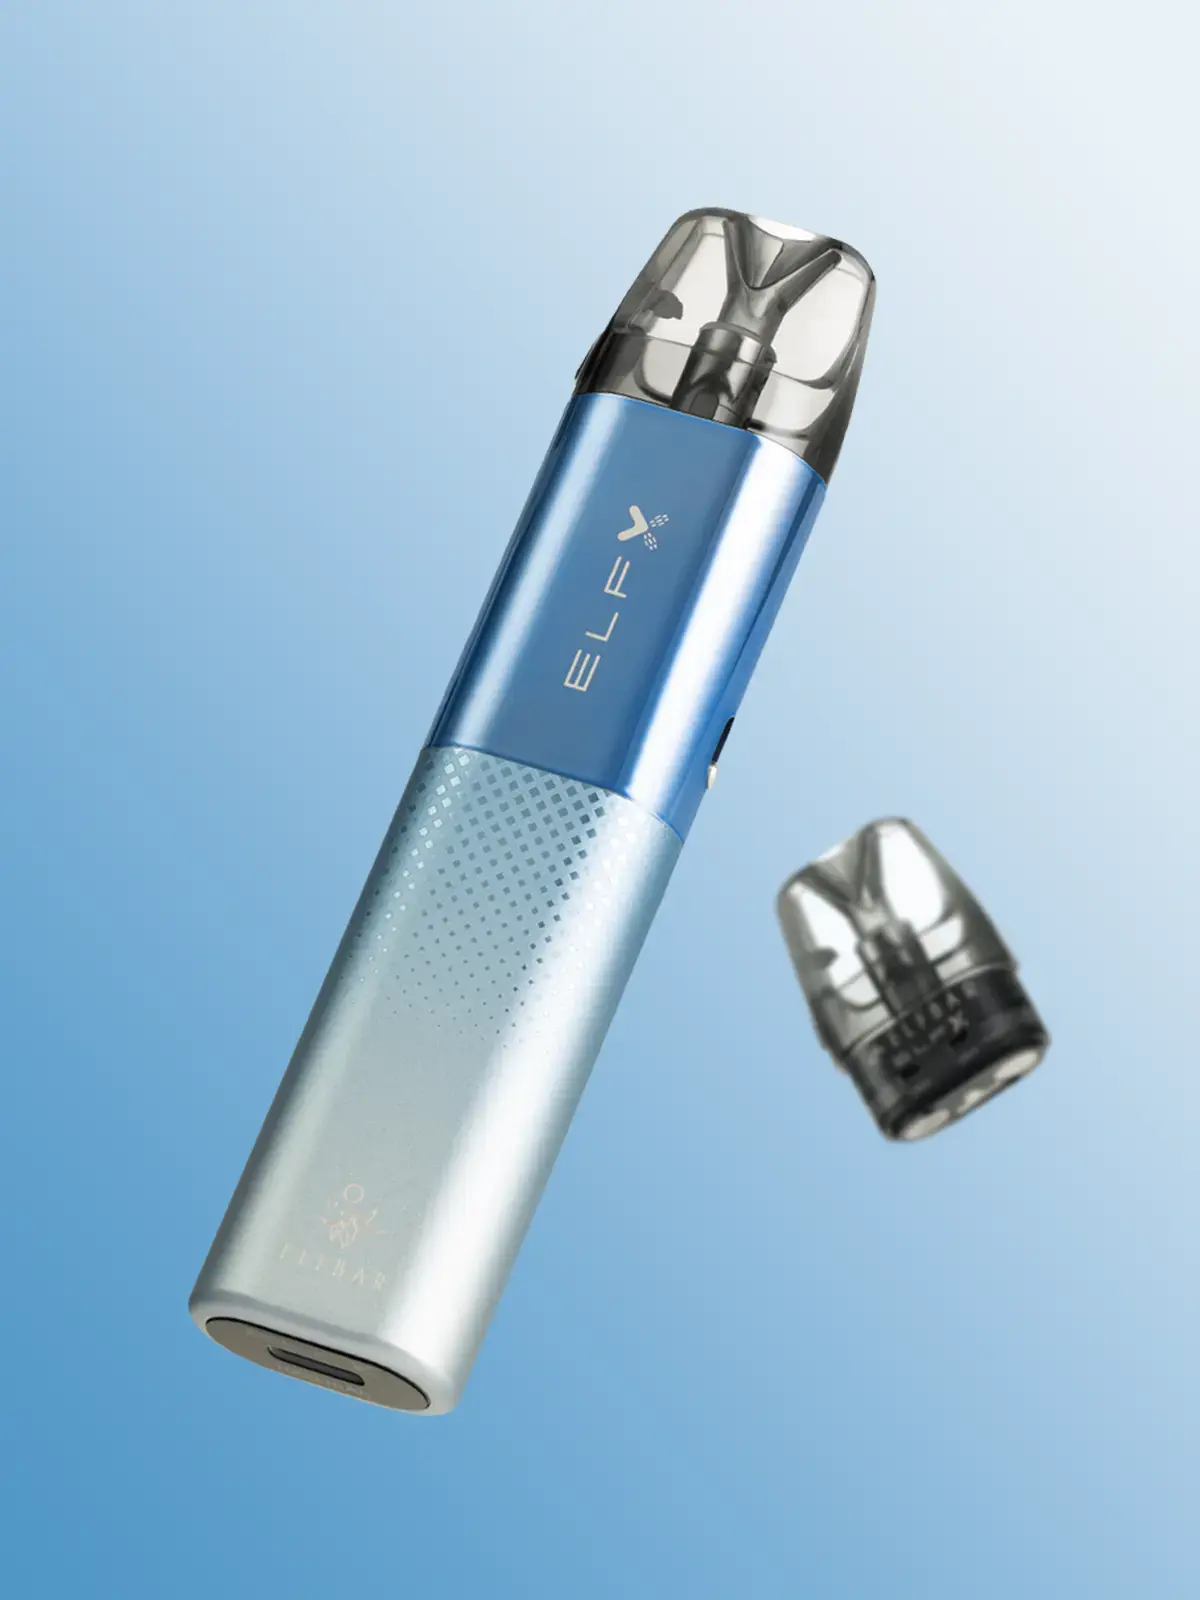 A blue Elf Bar Elfx device and a single pod floating behind it, in front of a light blue background